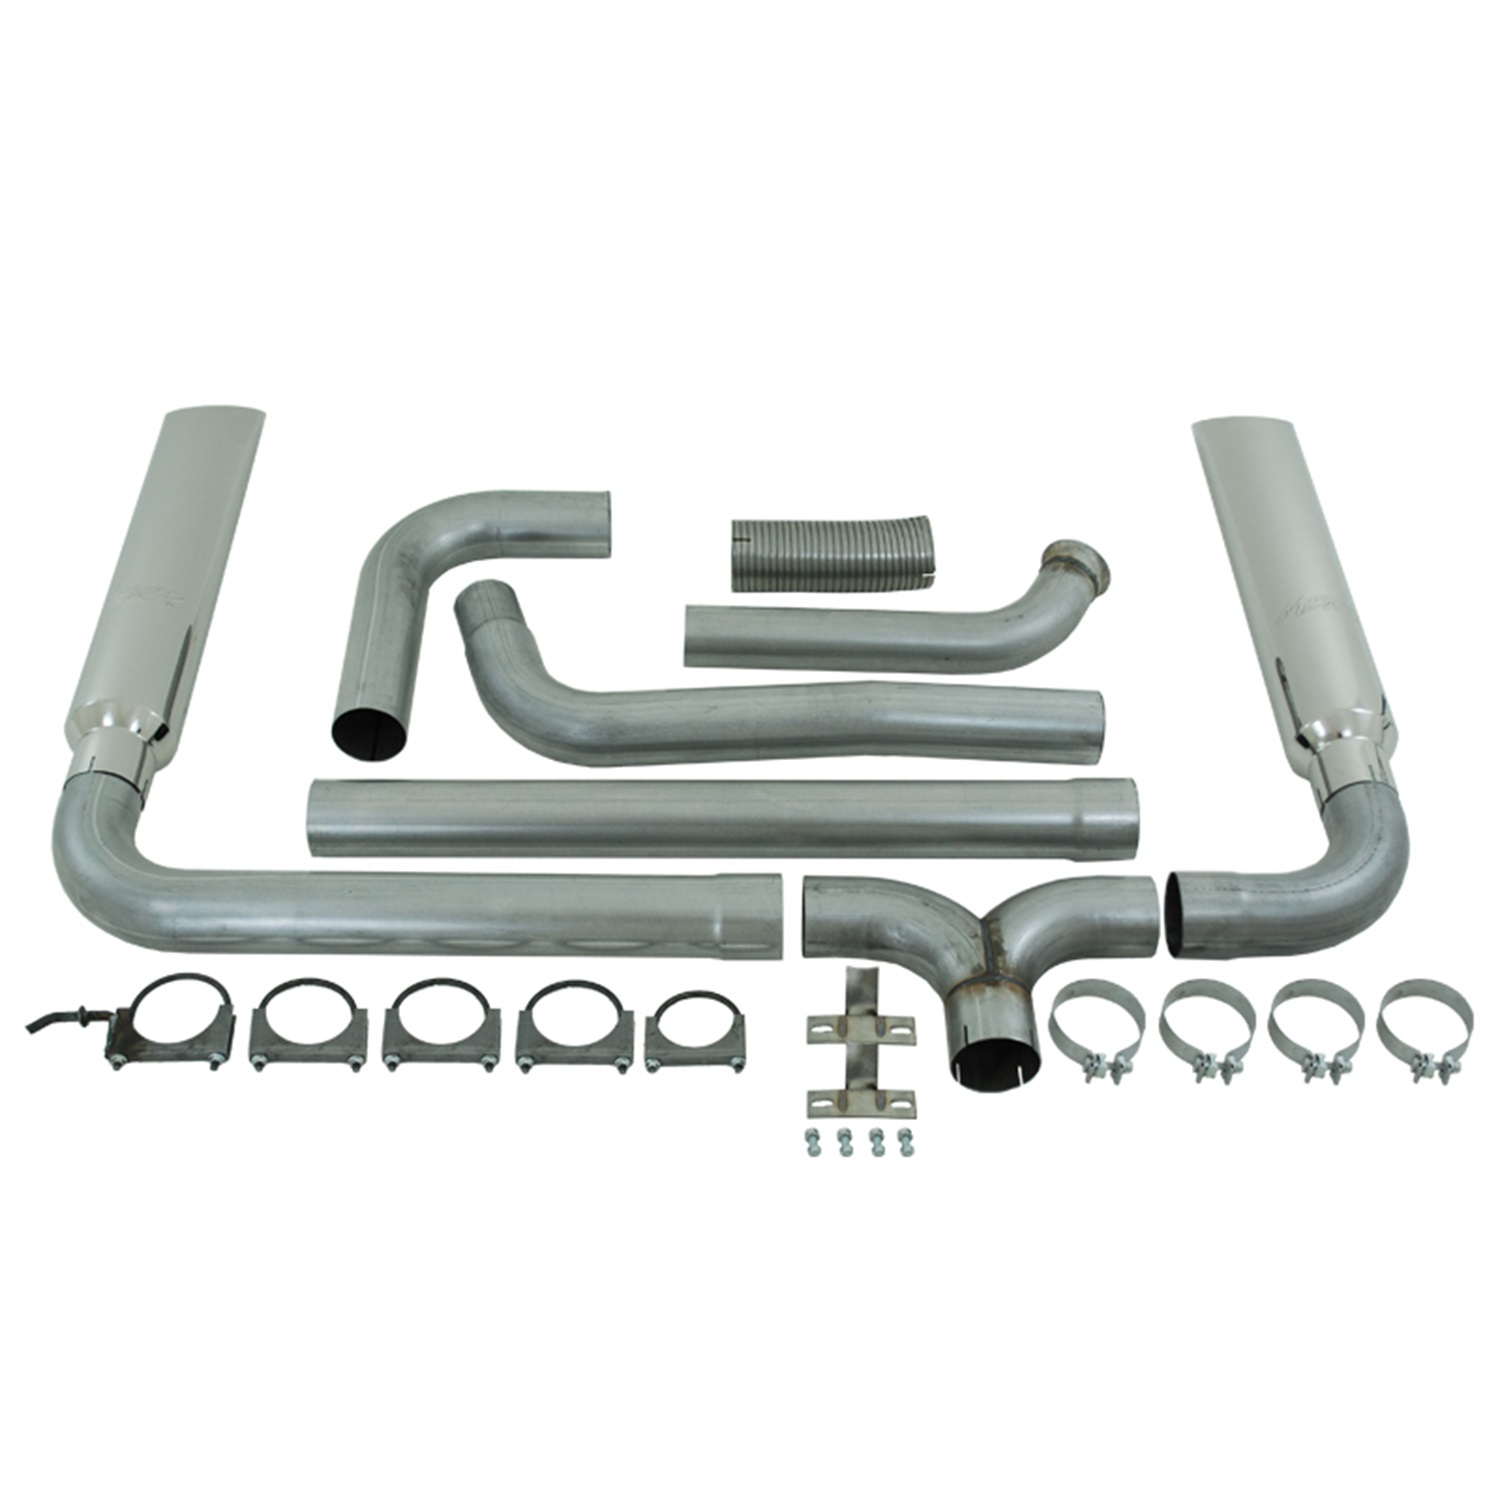 MBRP Exhaust MBRP Exhaust S9201AL Smokers; Installer Series Turbo Back Stack Exhaust System